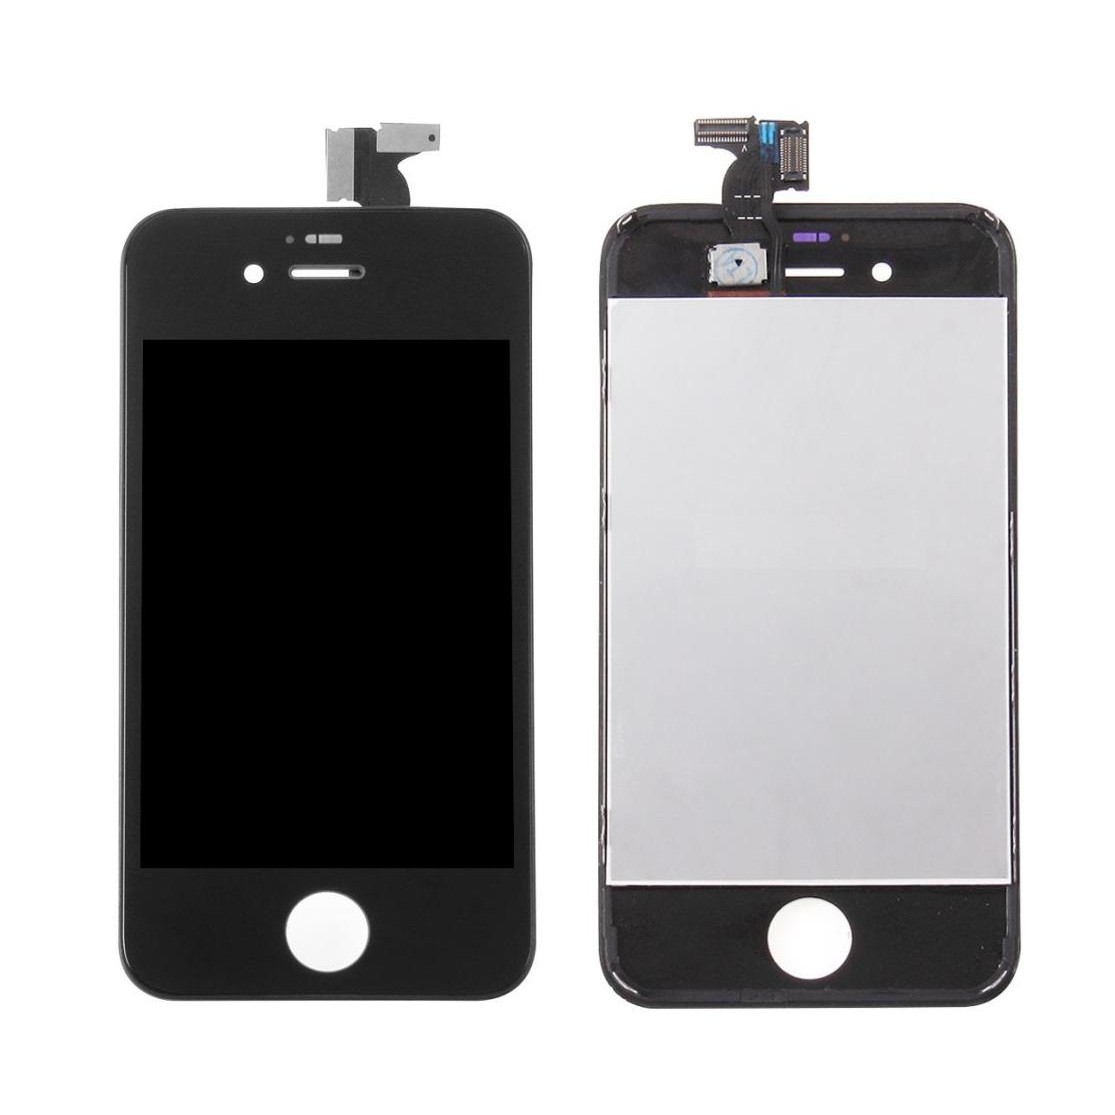 LCD with Touch Screen for Apple iPhone 4s - Black by